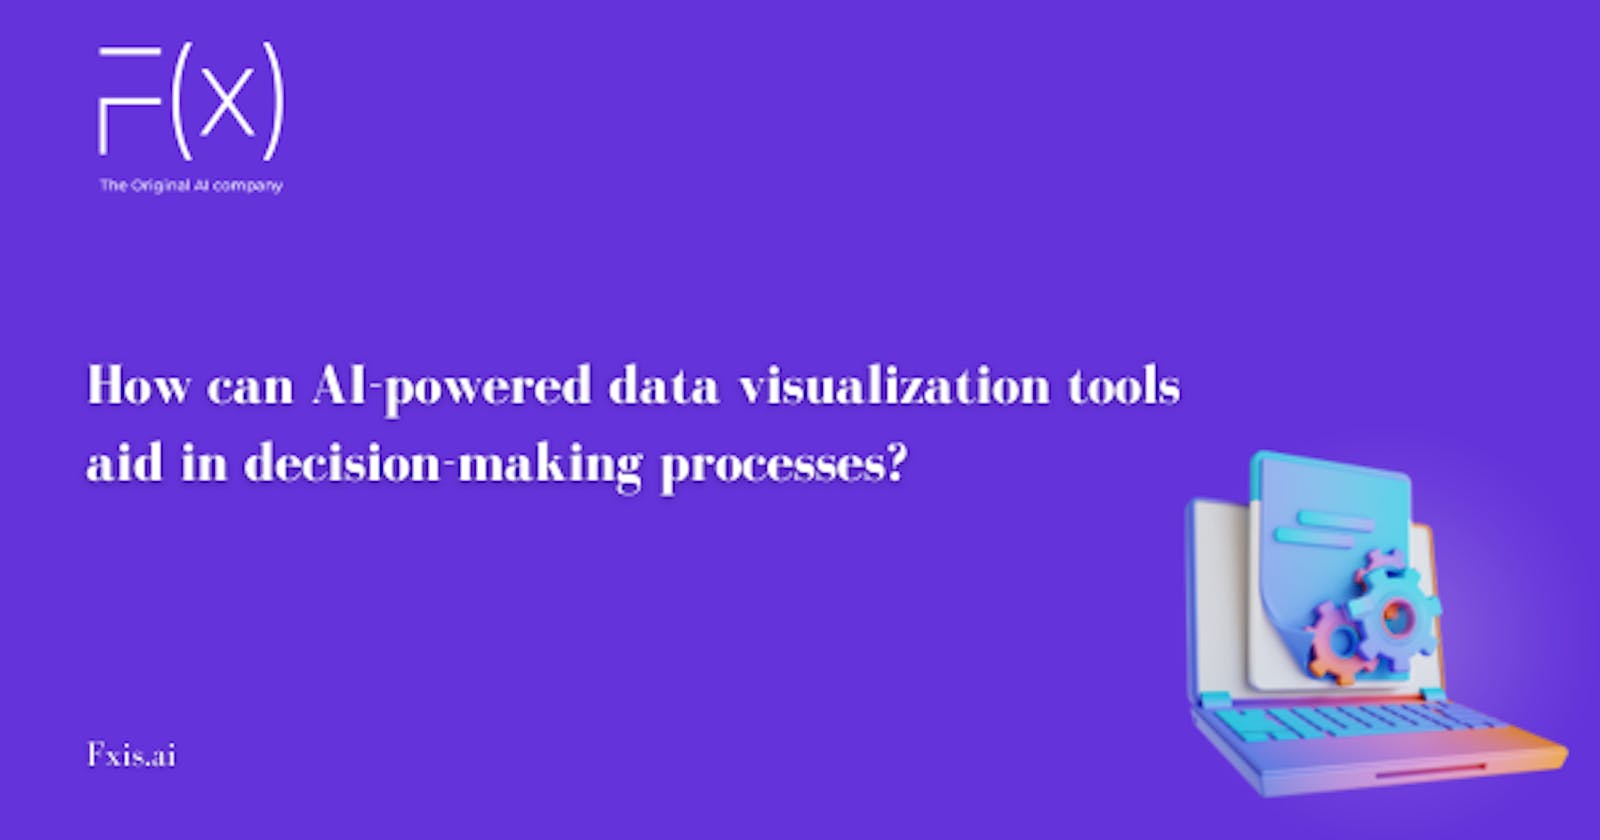 How can AI-powered data visualization tools aid in decision-making processes?